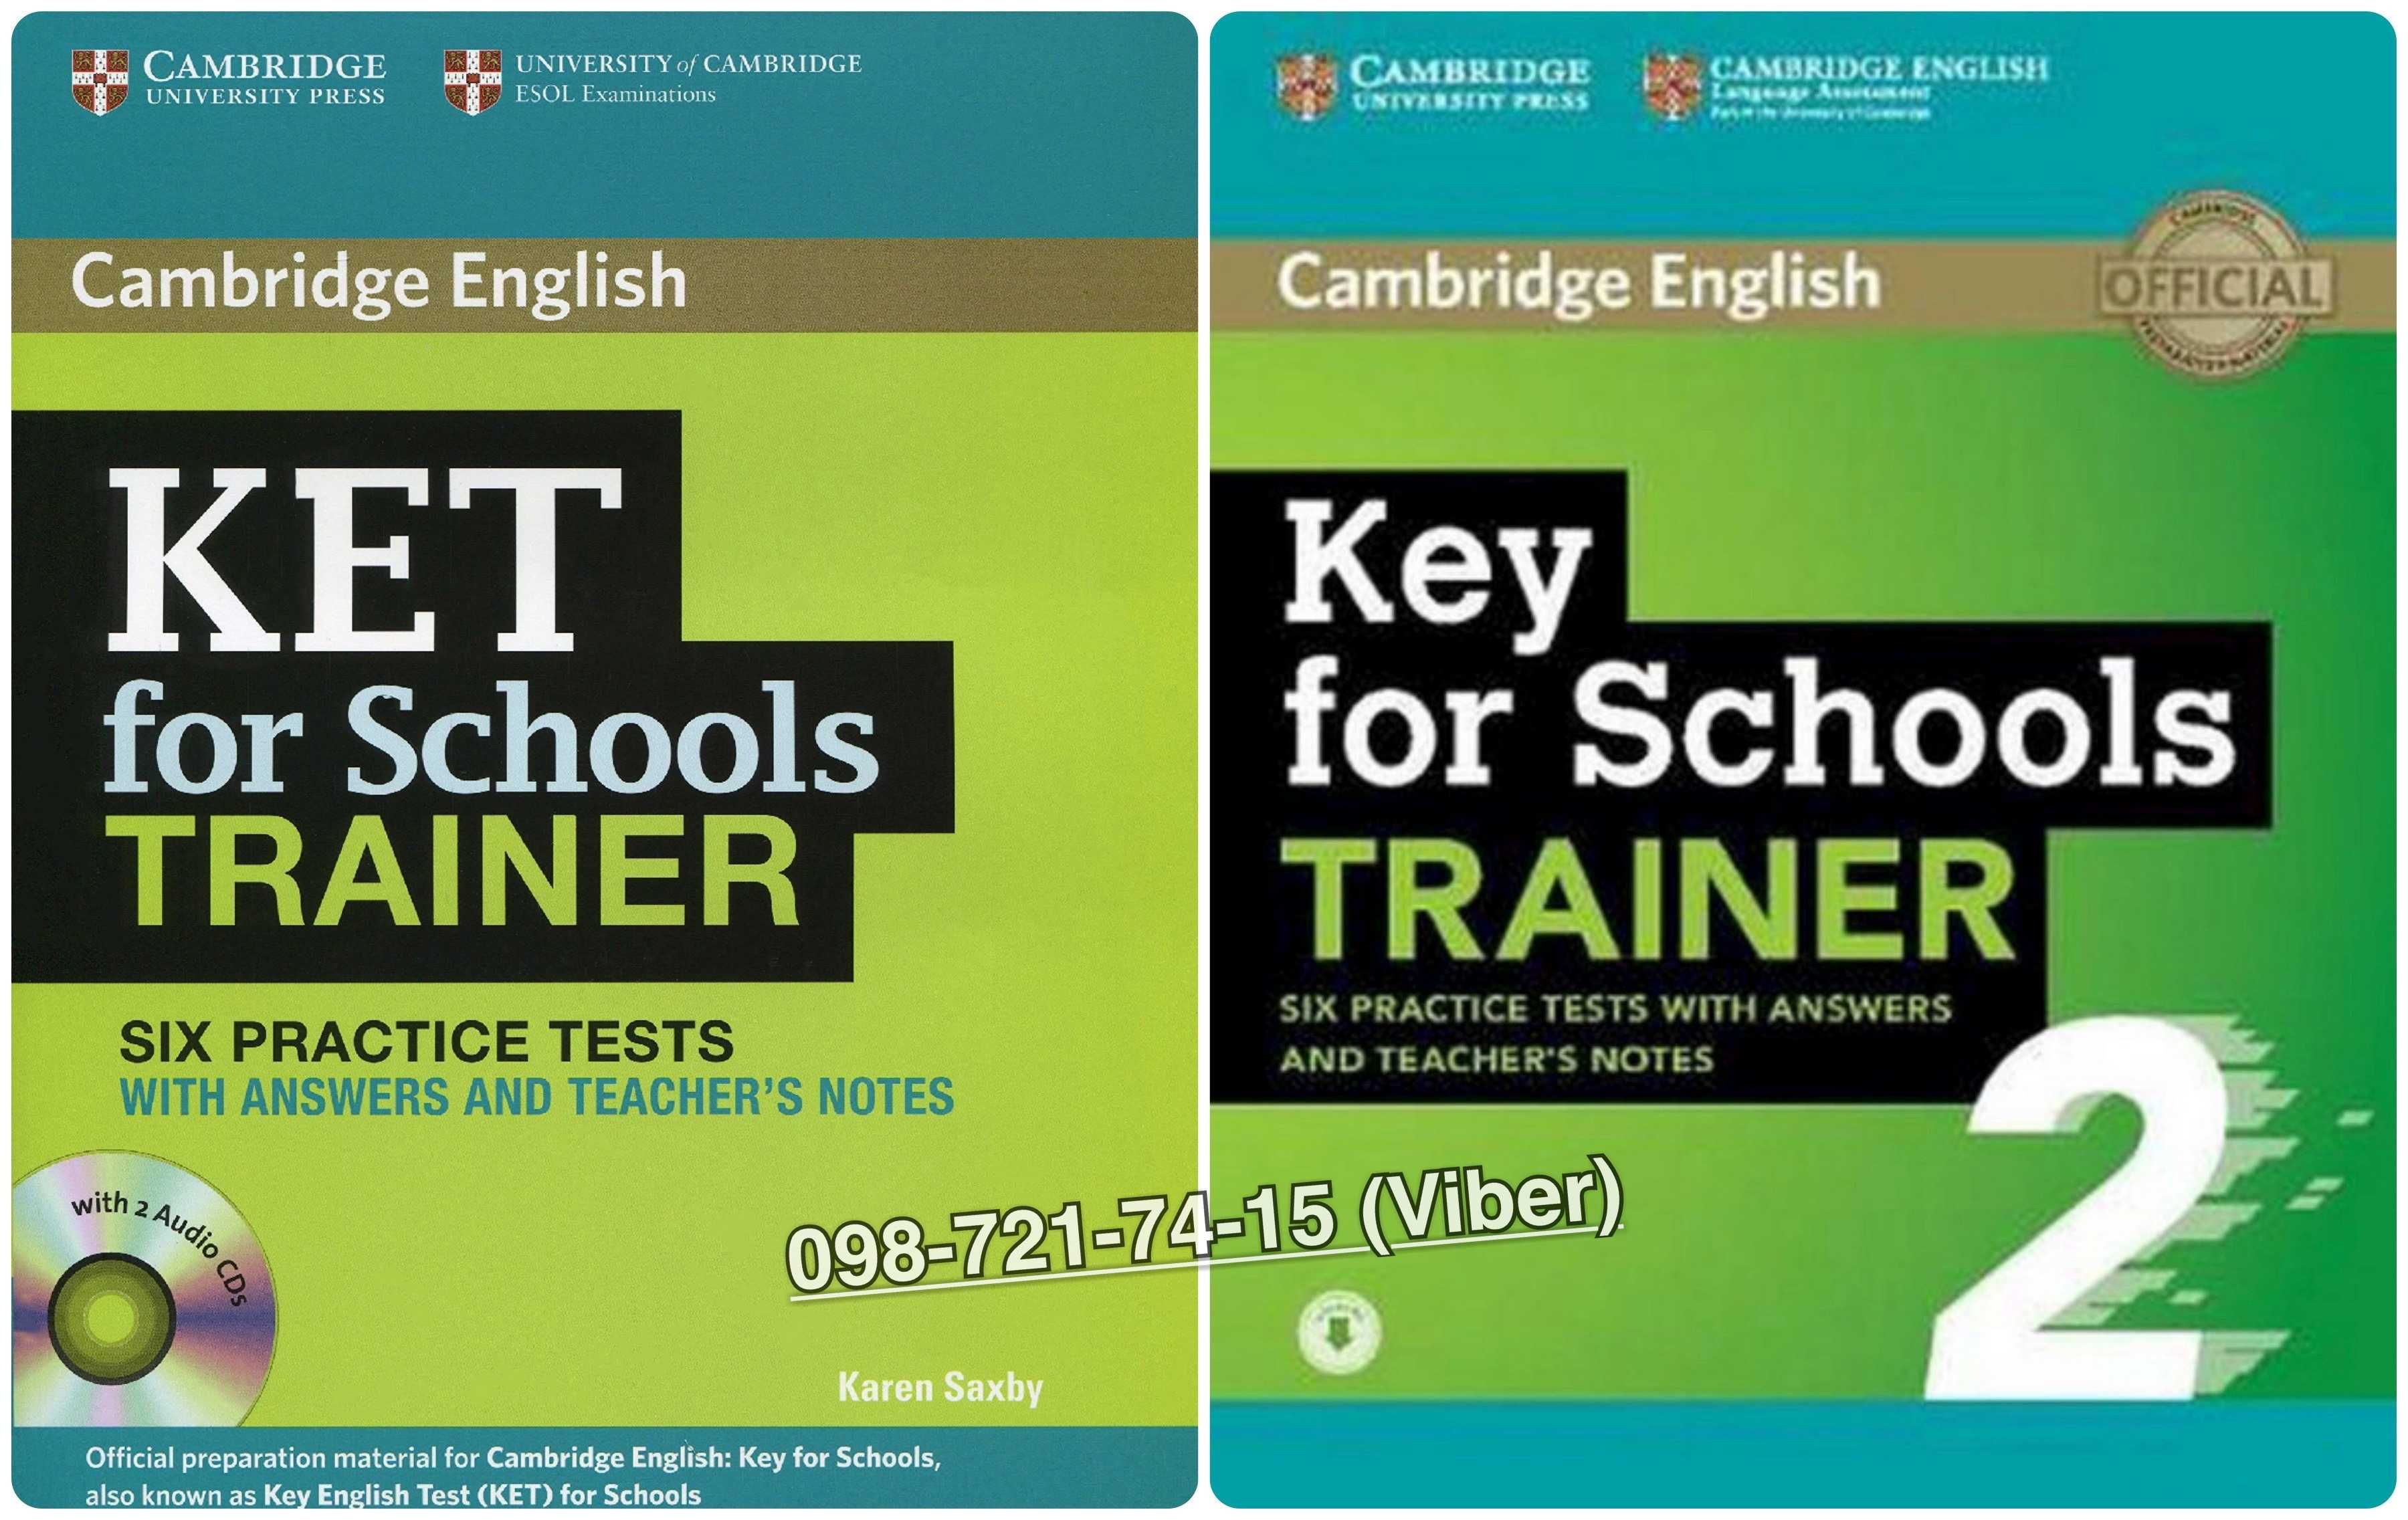 KET for Schools Trainer 1, 2. Six Practice Tests With Answers